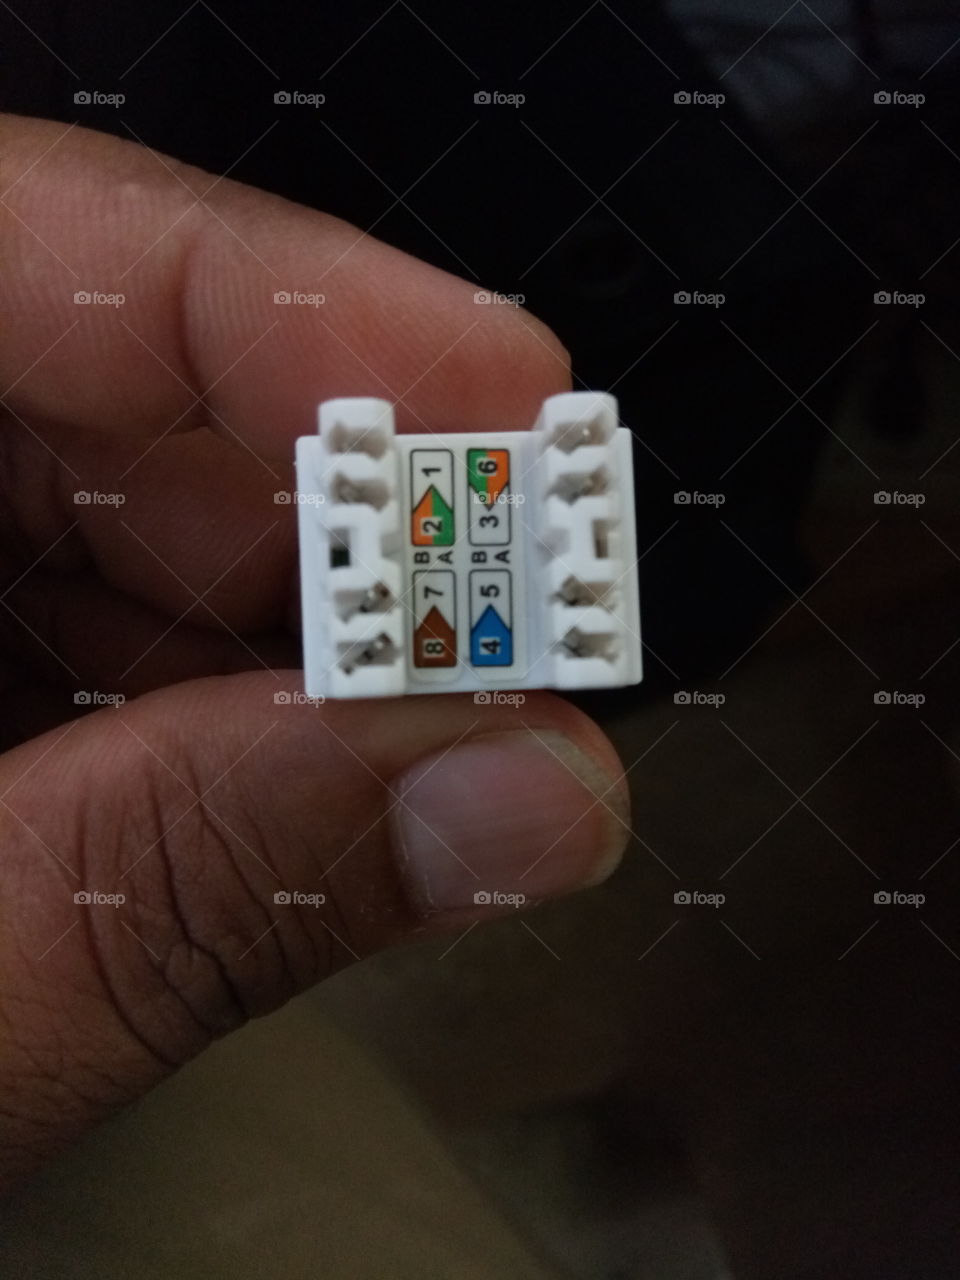 RJ45 CAT 6 OUTLET FOR INTERNET CONNECTION IT IS USED AS OUTLET FOR INTERNET CONNECTION IN YOUR COMPUTER OR ANY OTHER ONLINE MEDIA